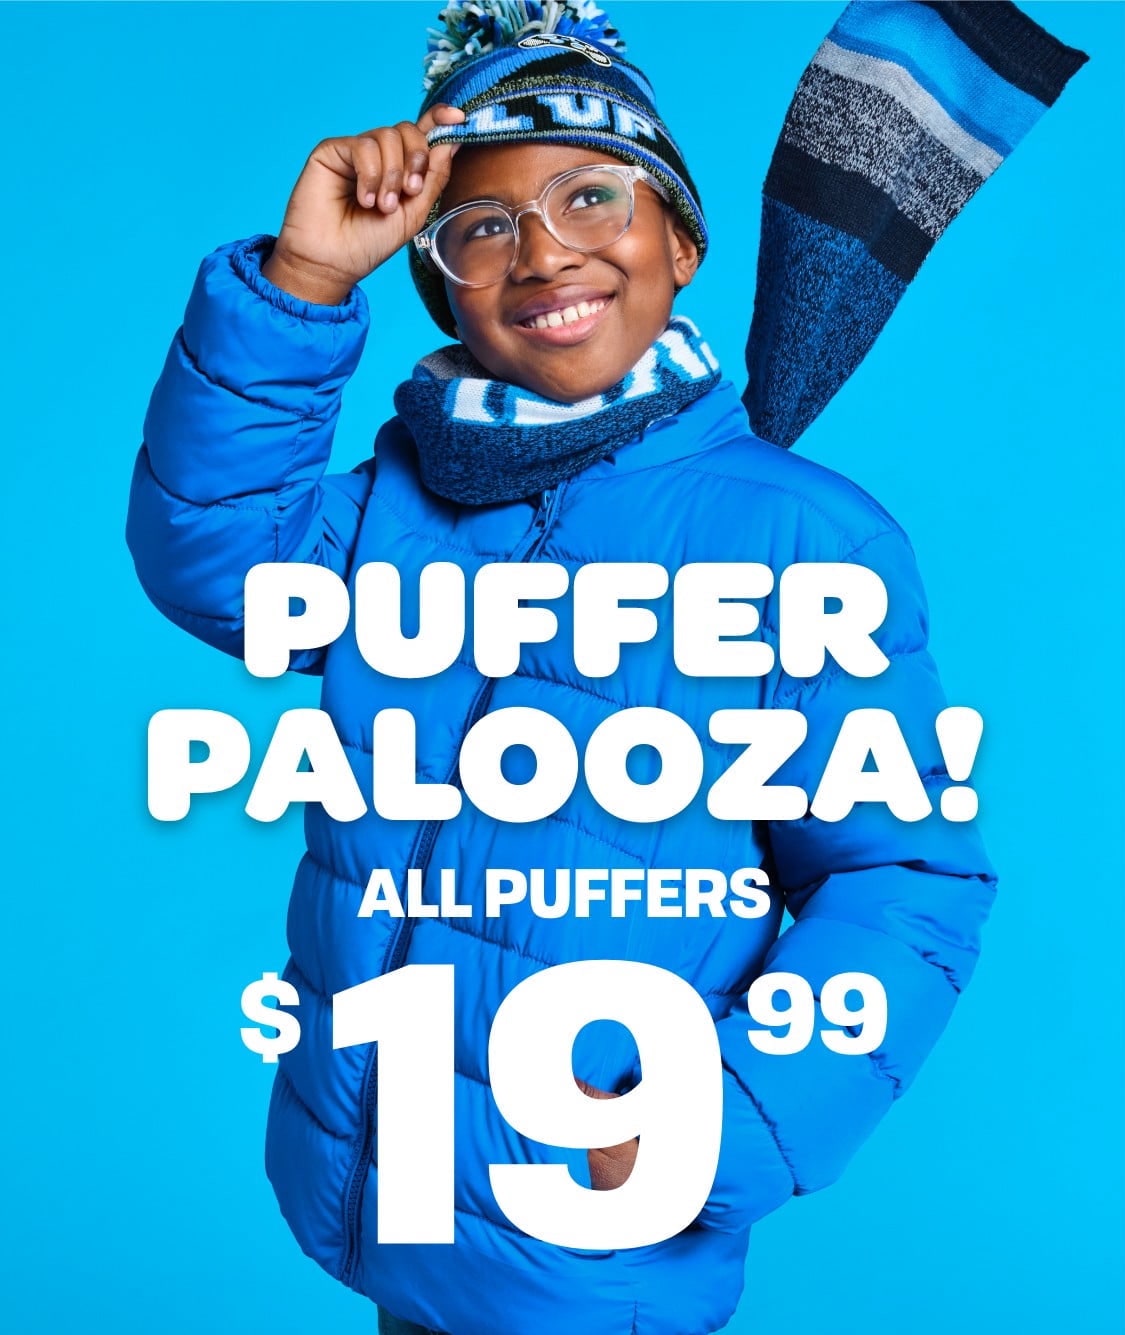 Limited Time Only! Puffer Palooza! $19.99 | EXTRA SAVINGS Up to 30% off! With code SAVEMORE